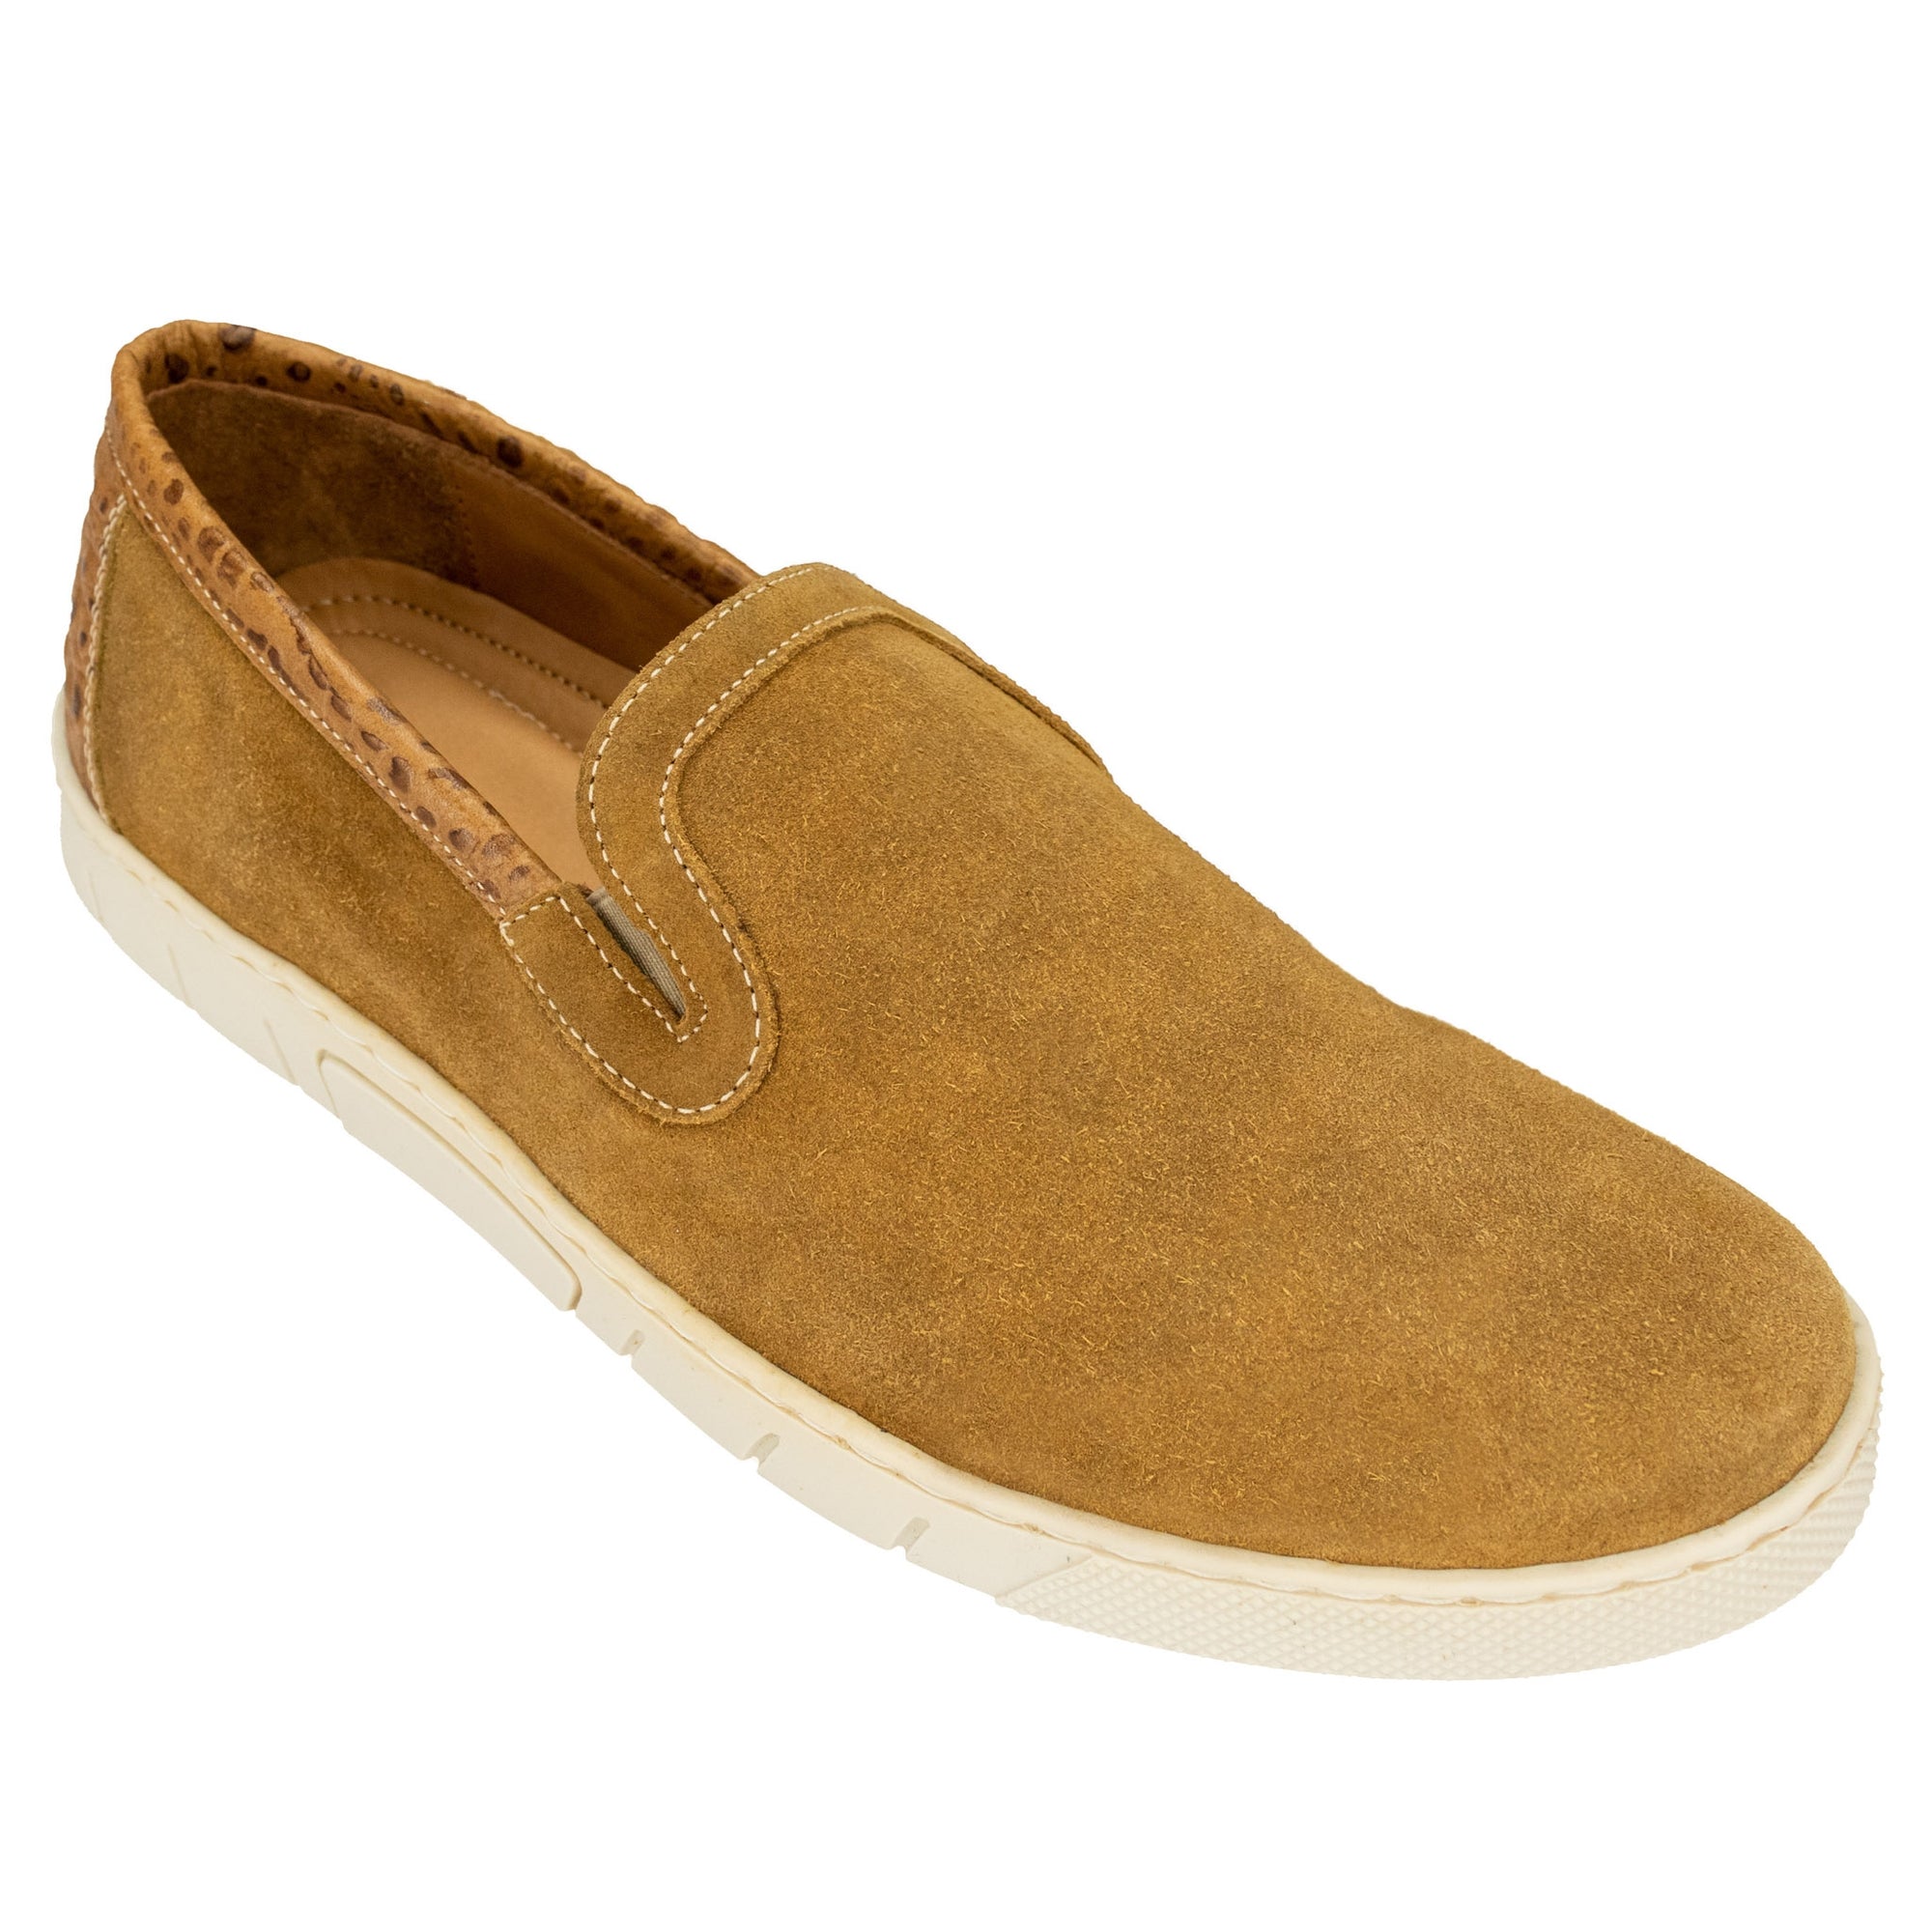 Scottsdale Slip on in Tan Suede by T.B. Phelps